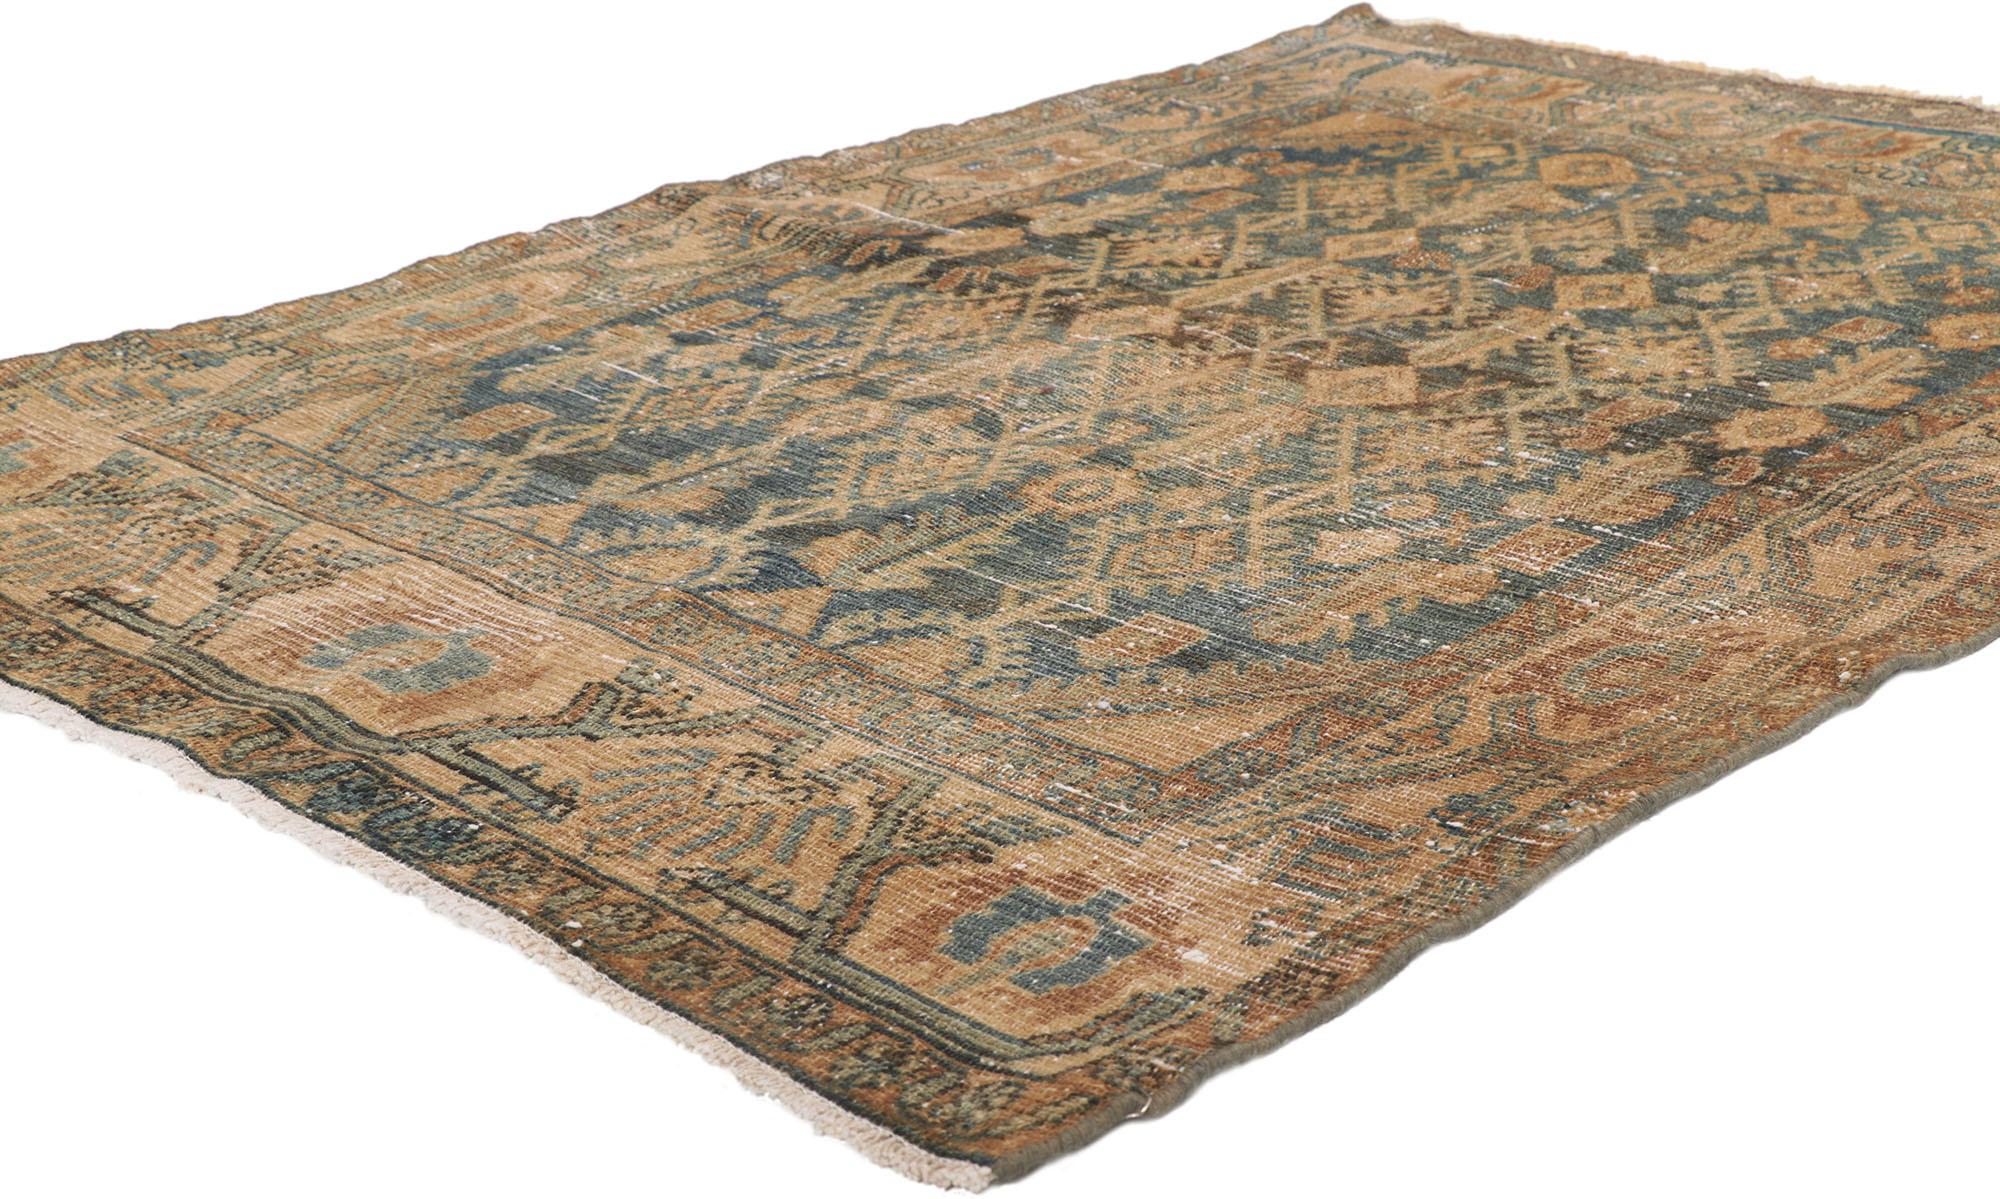 53742 Antique Persian Malayer rug, 03'09 x 05'06.
Distressed. Desirable Age Wear. Antique Wash. Abrash. Hand-knotted wool. Made in Iran.